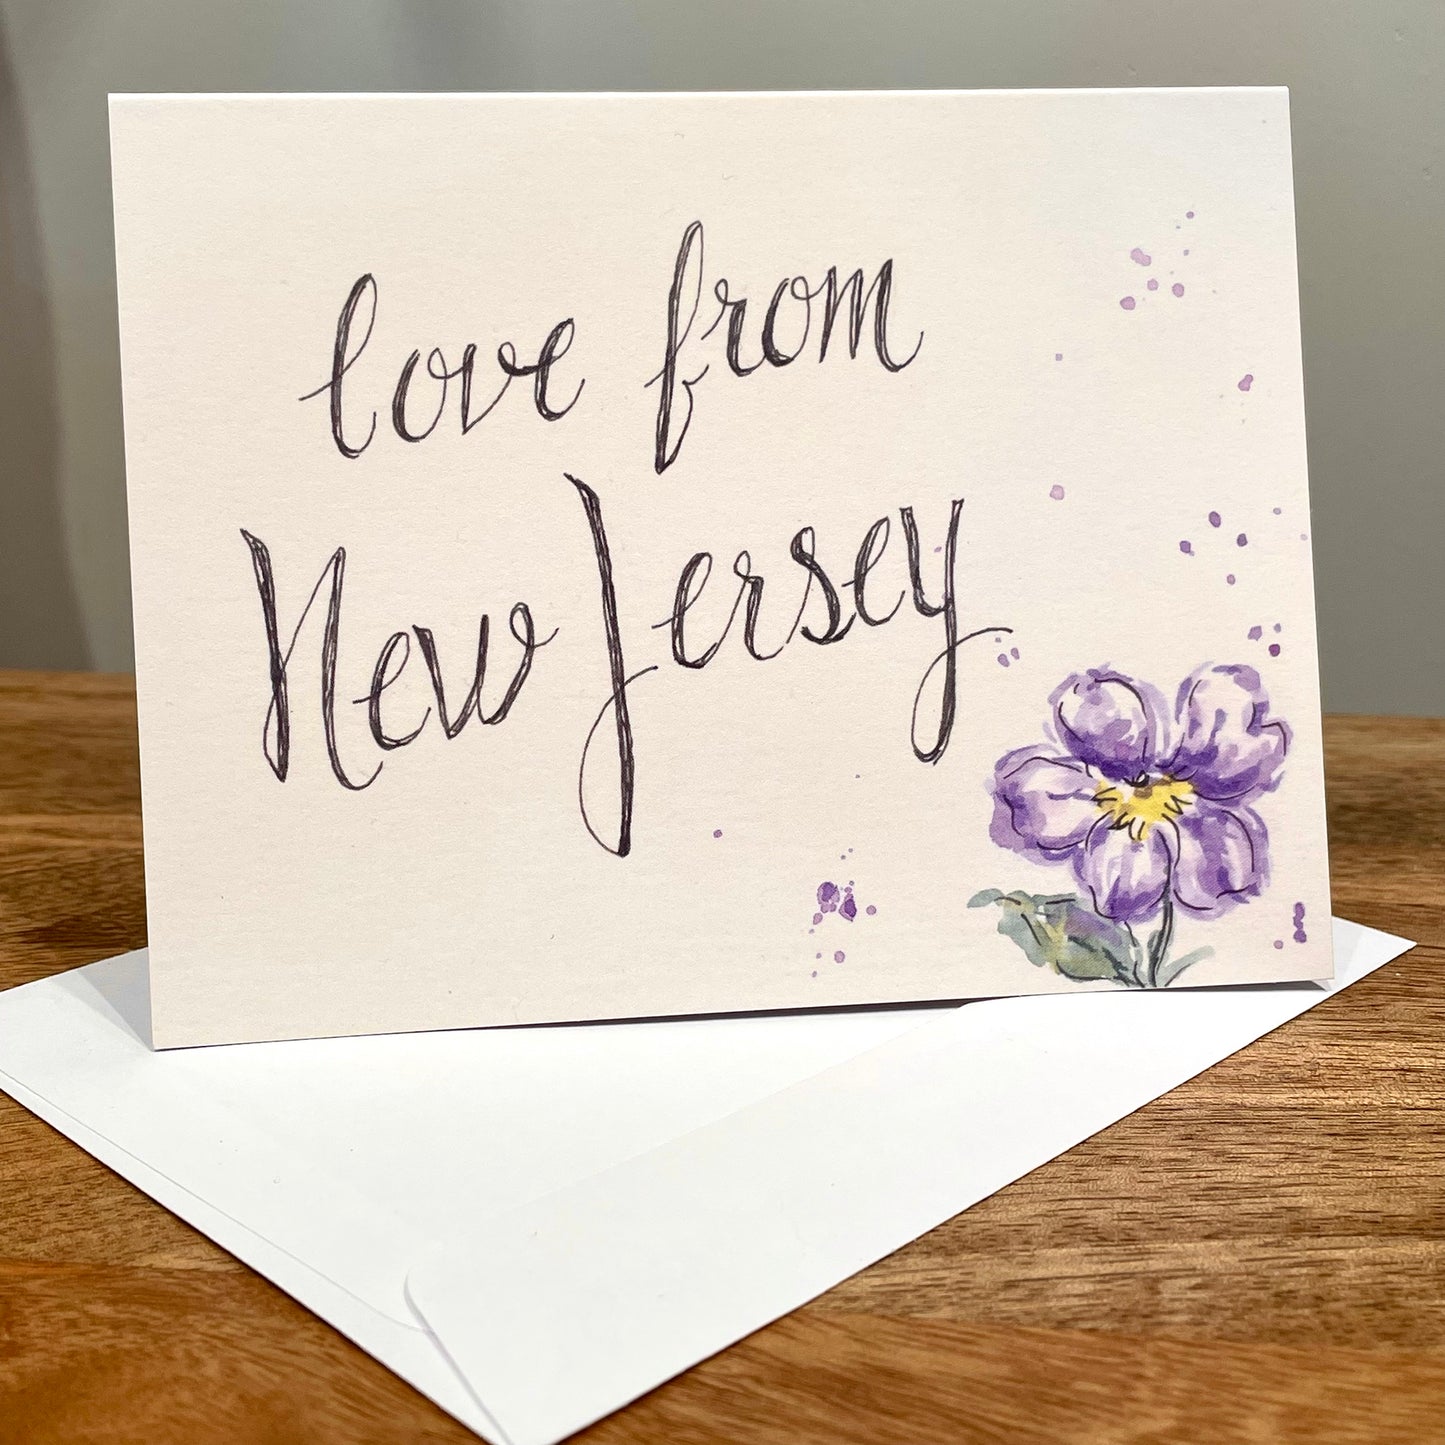 LOVE from New Jersey Greeting Card